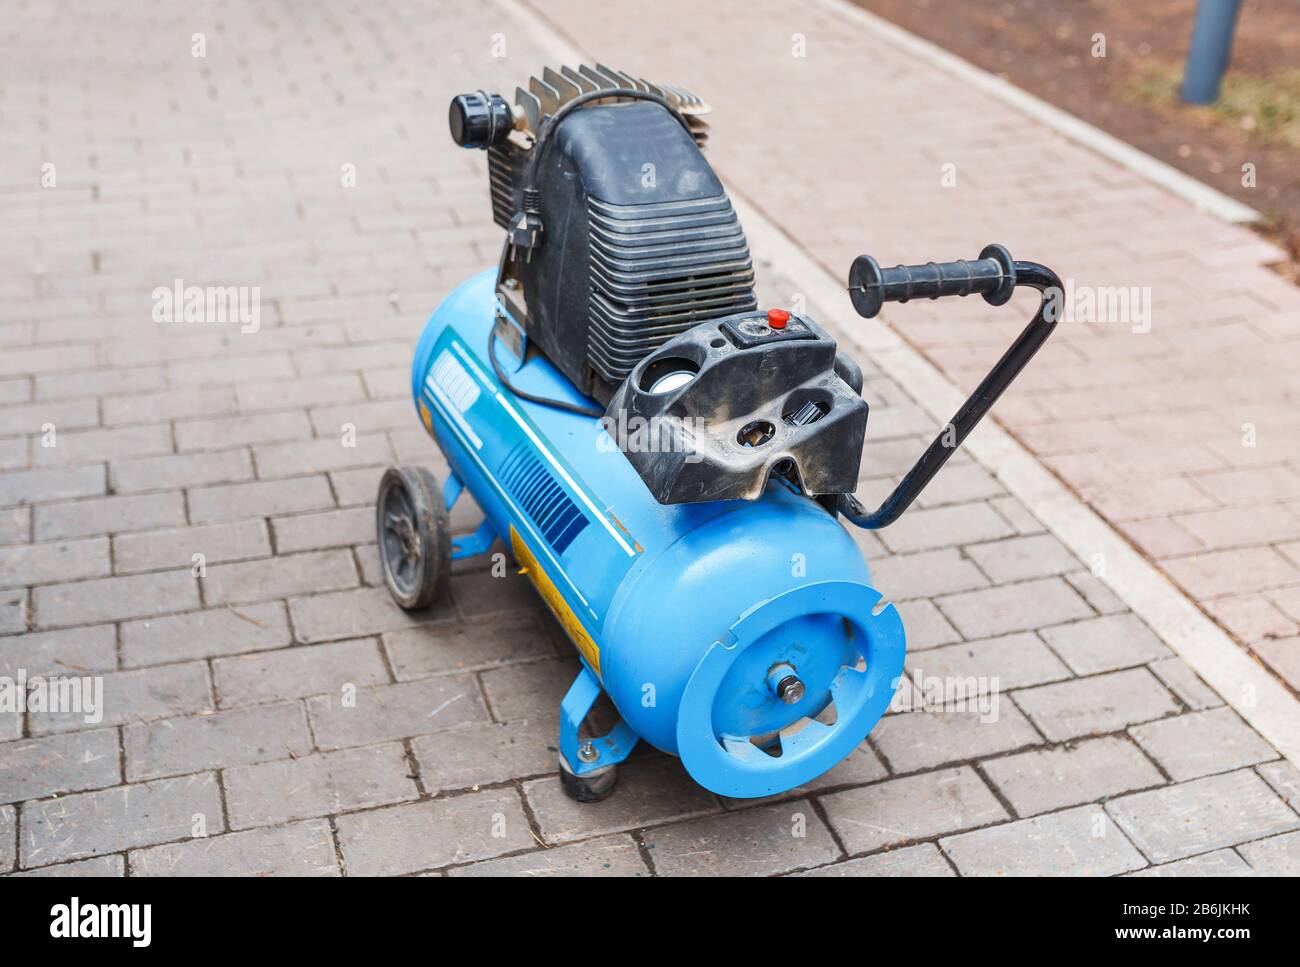 The small industry air pump compressor Stock Photo - Alamy